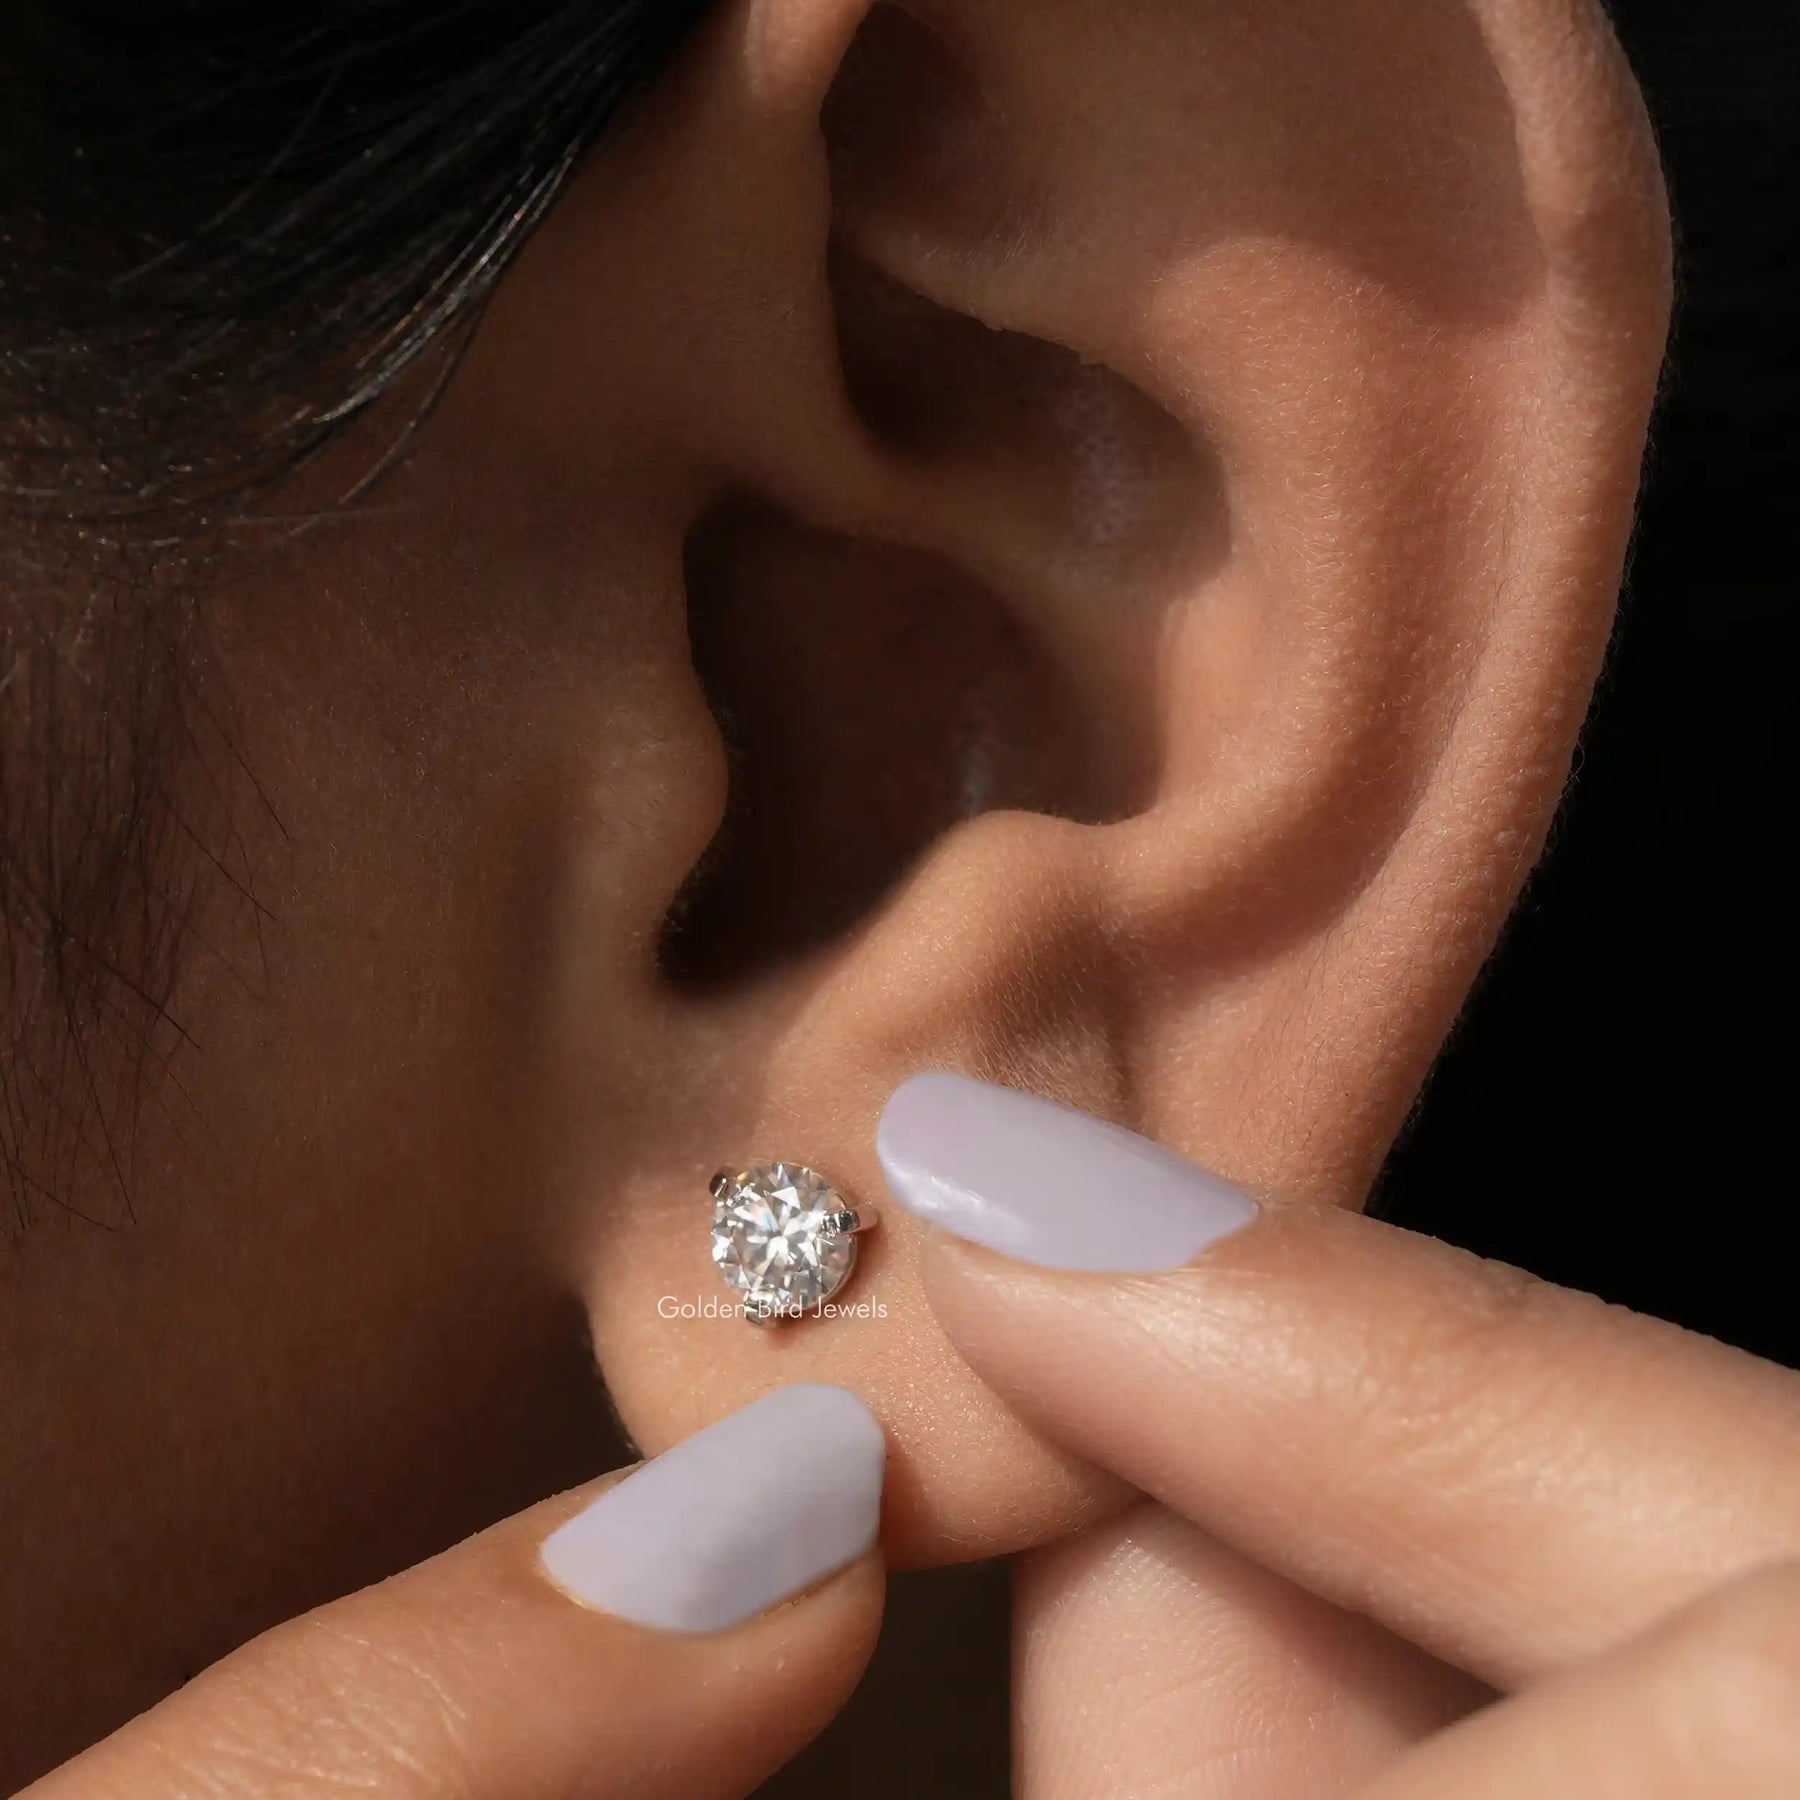 [In ear front view of martini setting earrings]-[Golden Bird Jewels]